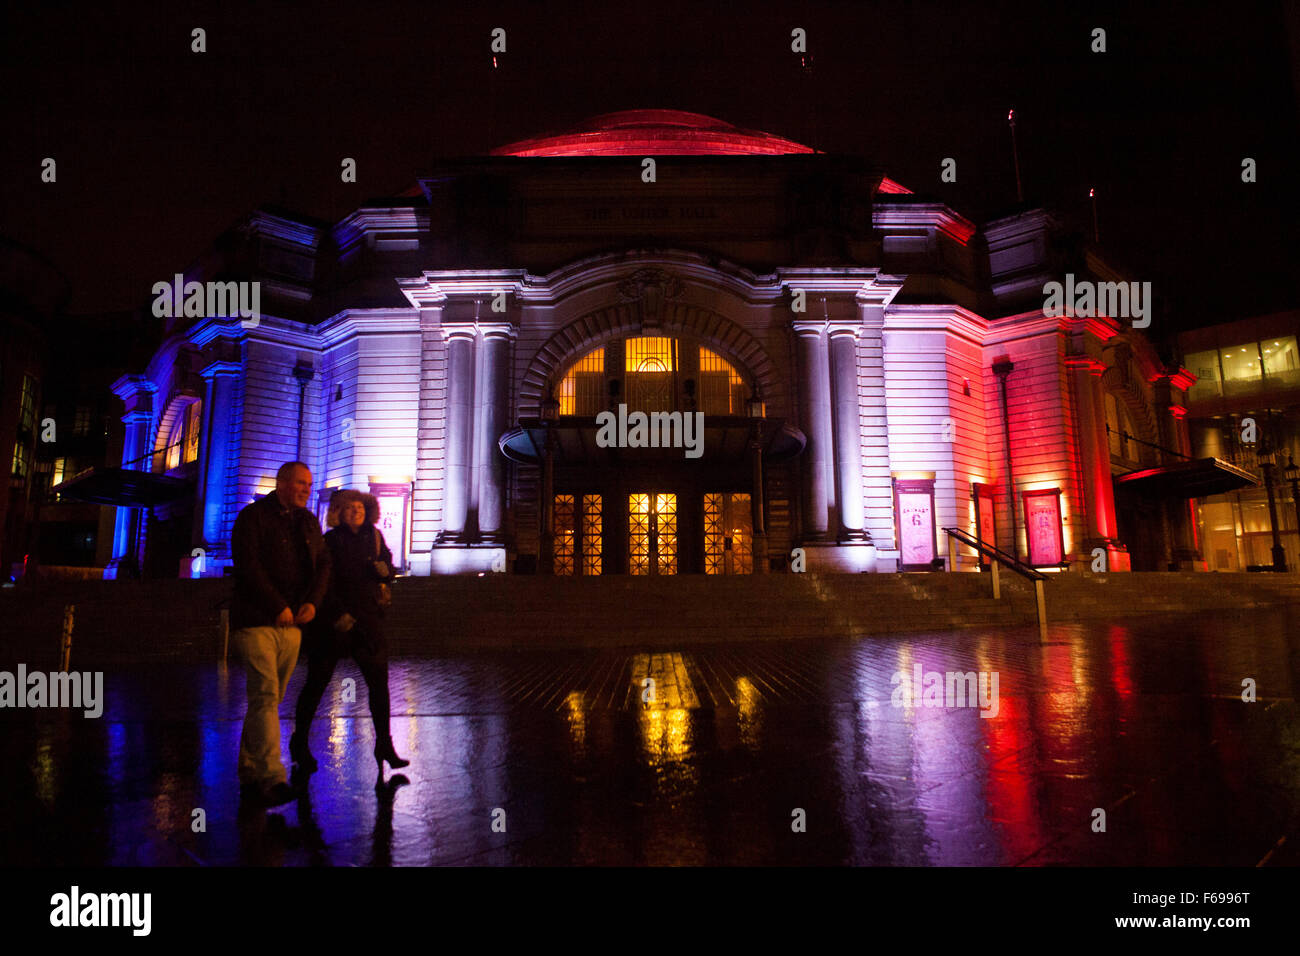 Edinburgh, UK. 14 November. Scotland's Capital turned Red, White and Blue at the Usher Hall. The colors of the French flag. The aim was to show solidarity with victims of the Paris terror attacks. Pako Mera/Alamy Live News. Stock Photo